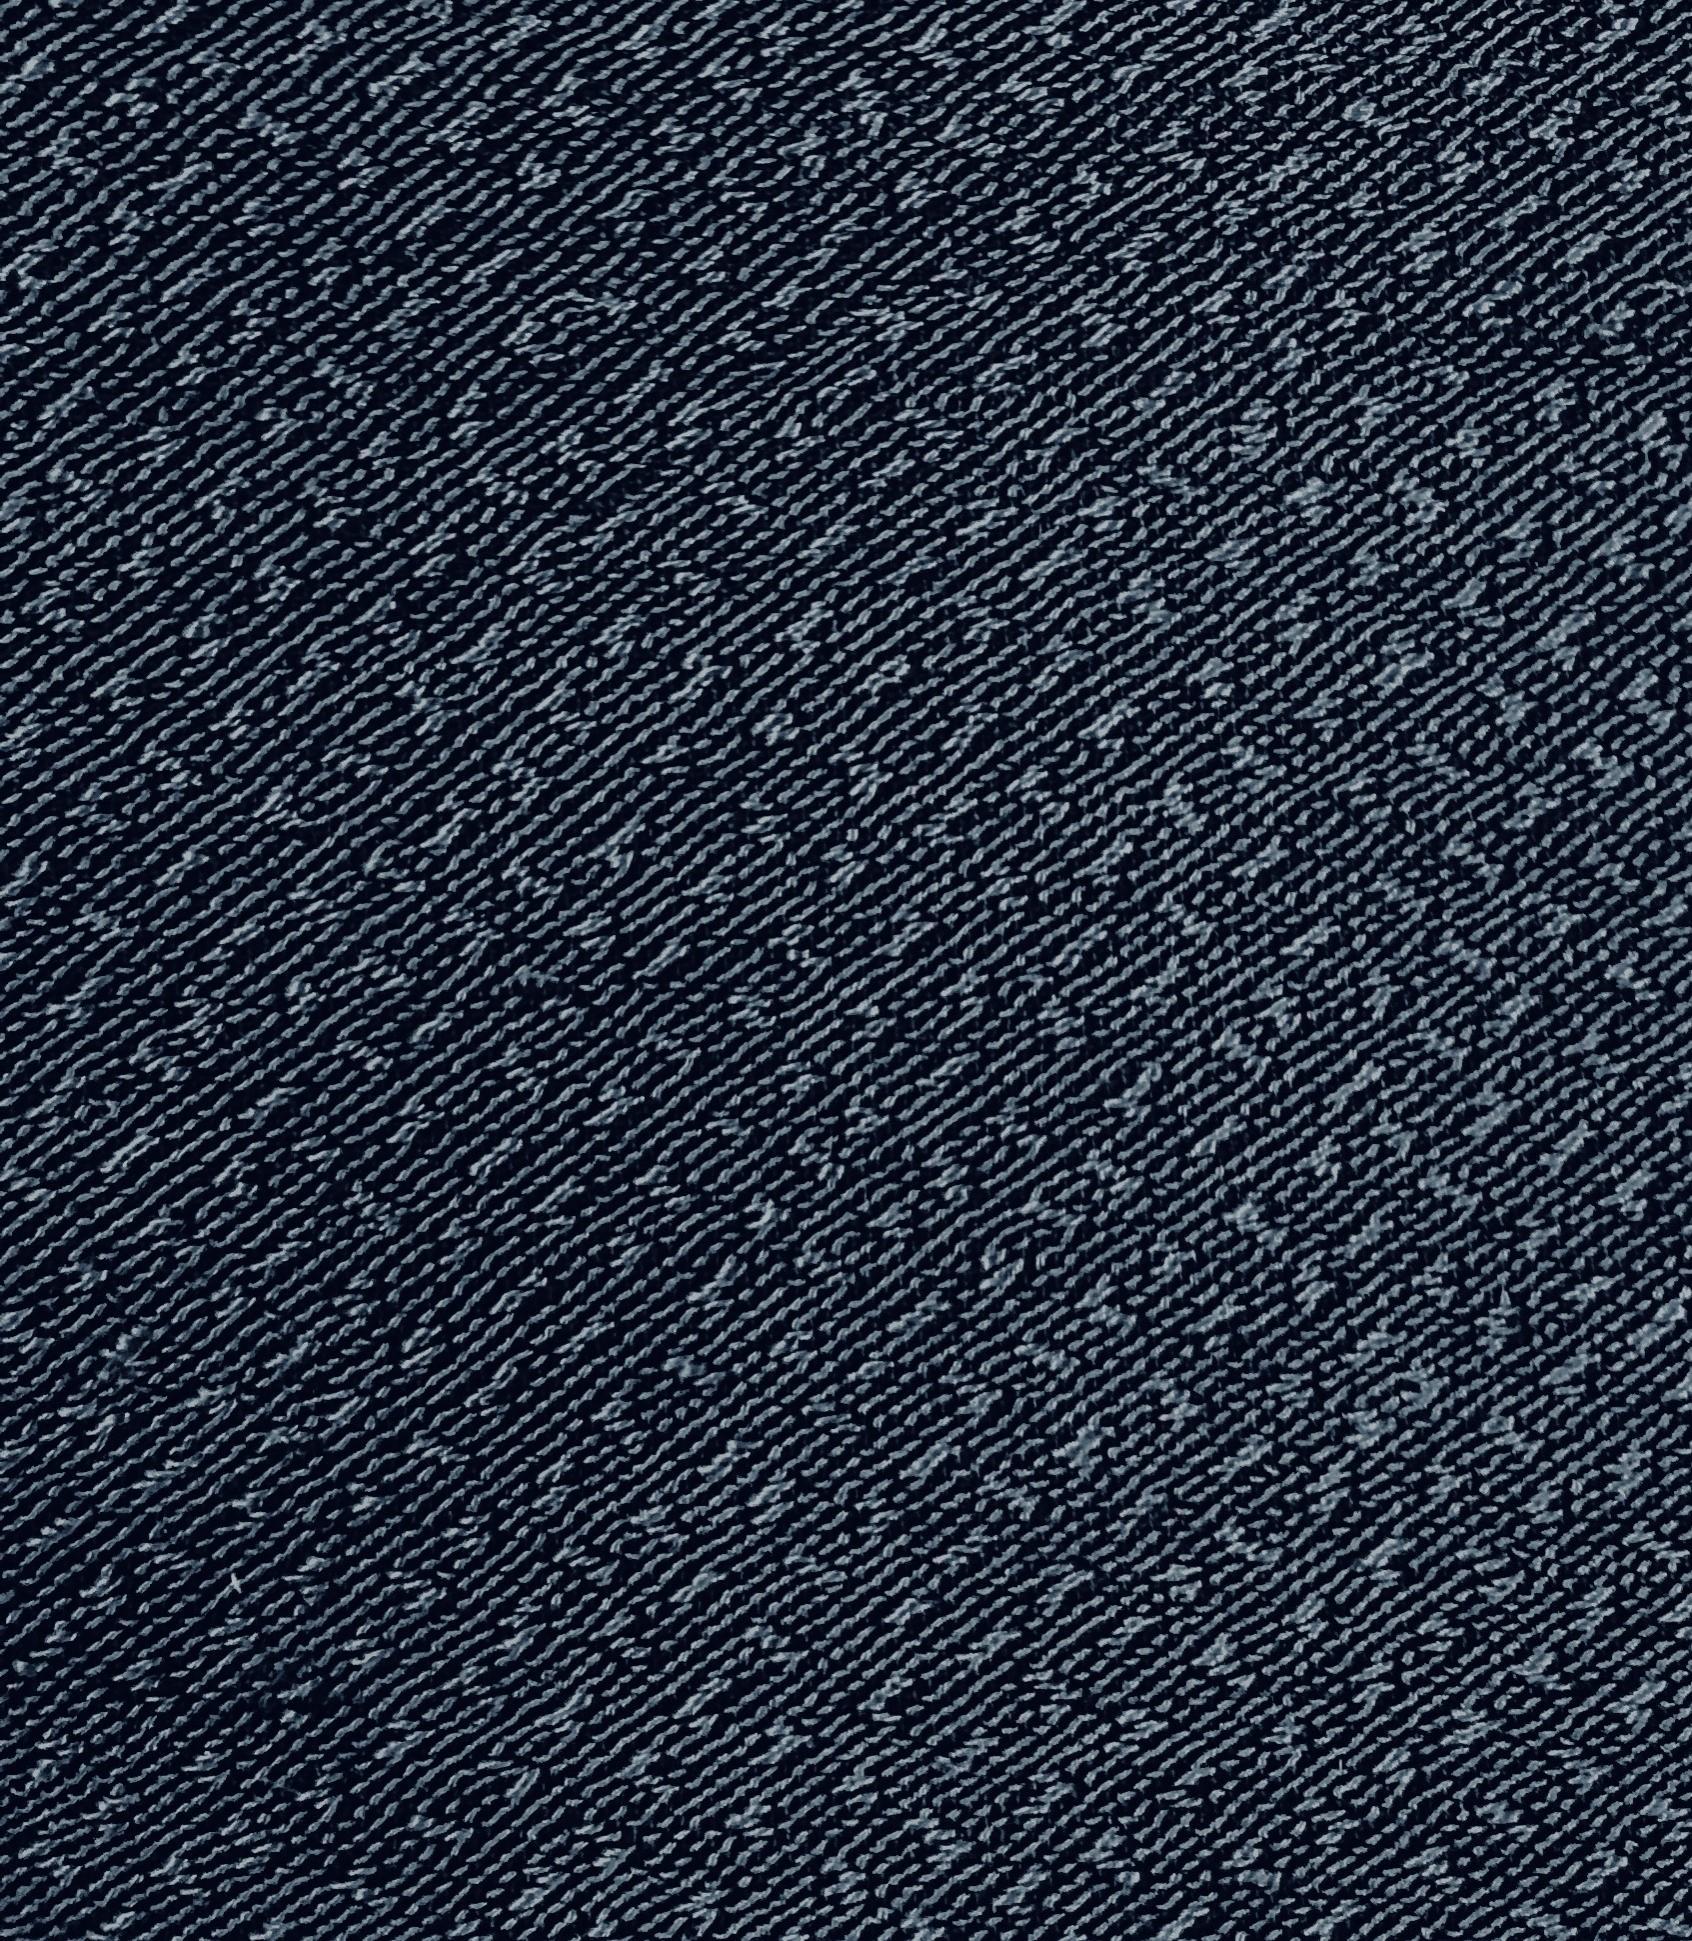 Deep teal vintage 100% Freezie fabric with simple plain weave nap design. Perfect for couches, chairs, and more! Very durable.

This fabric is 55